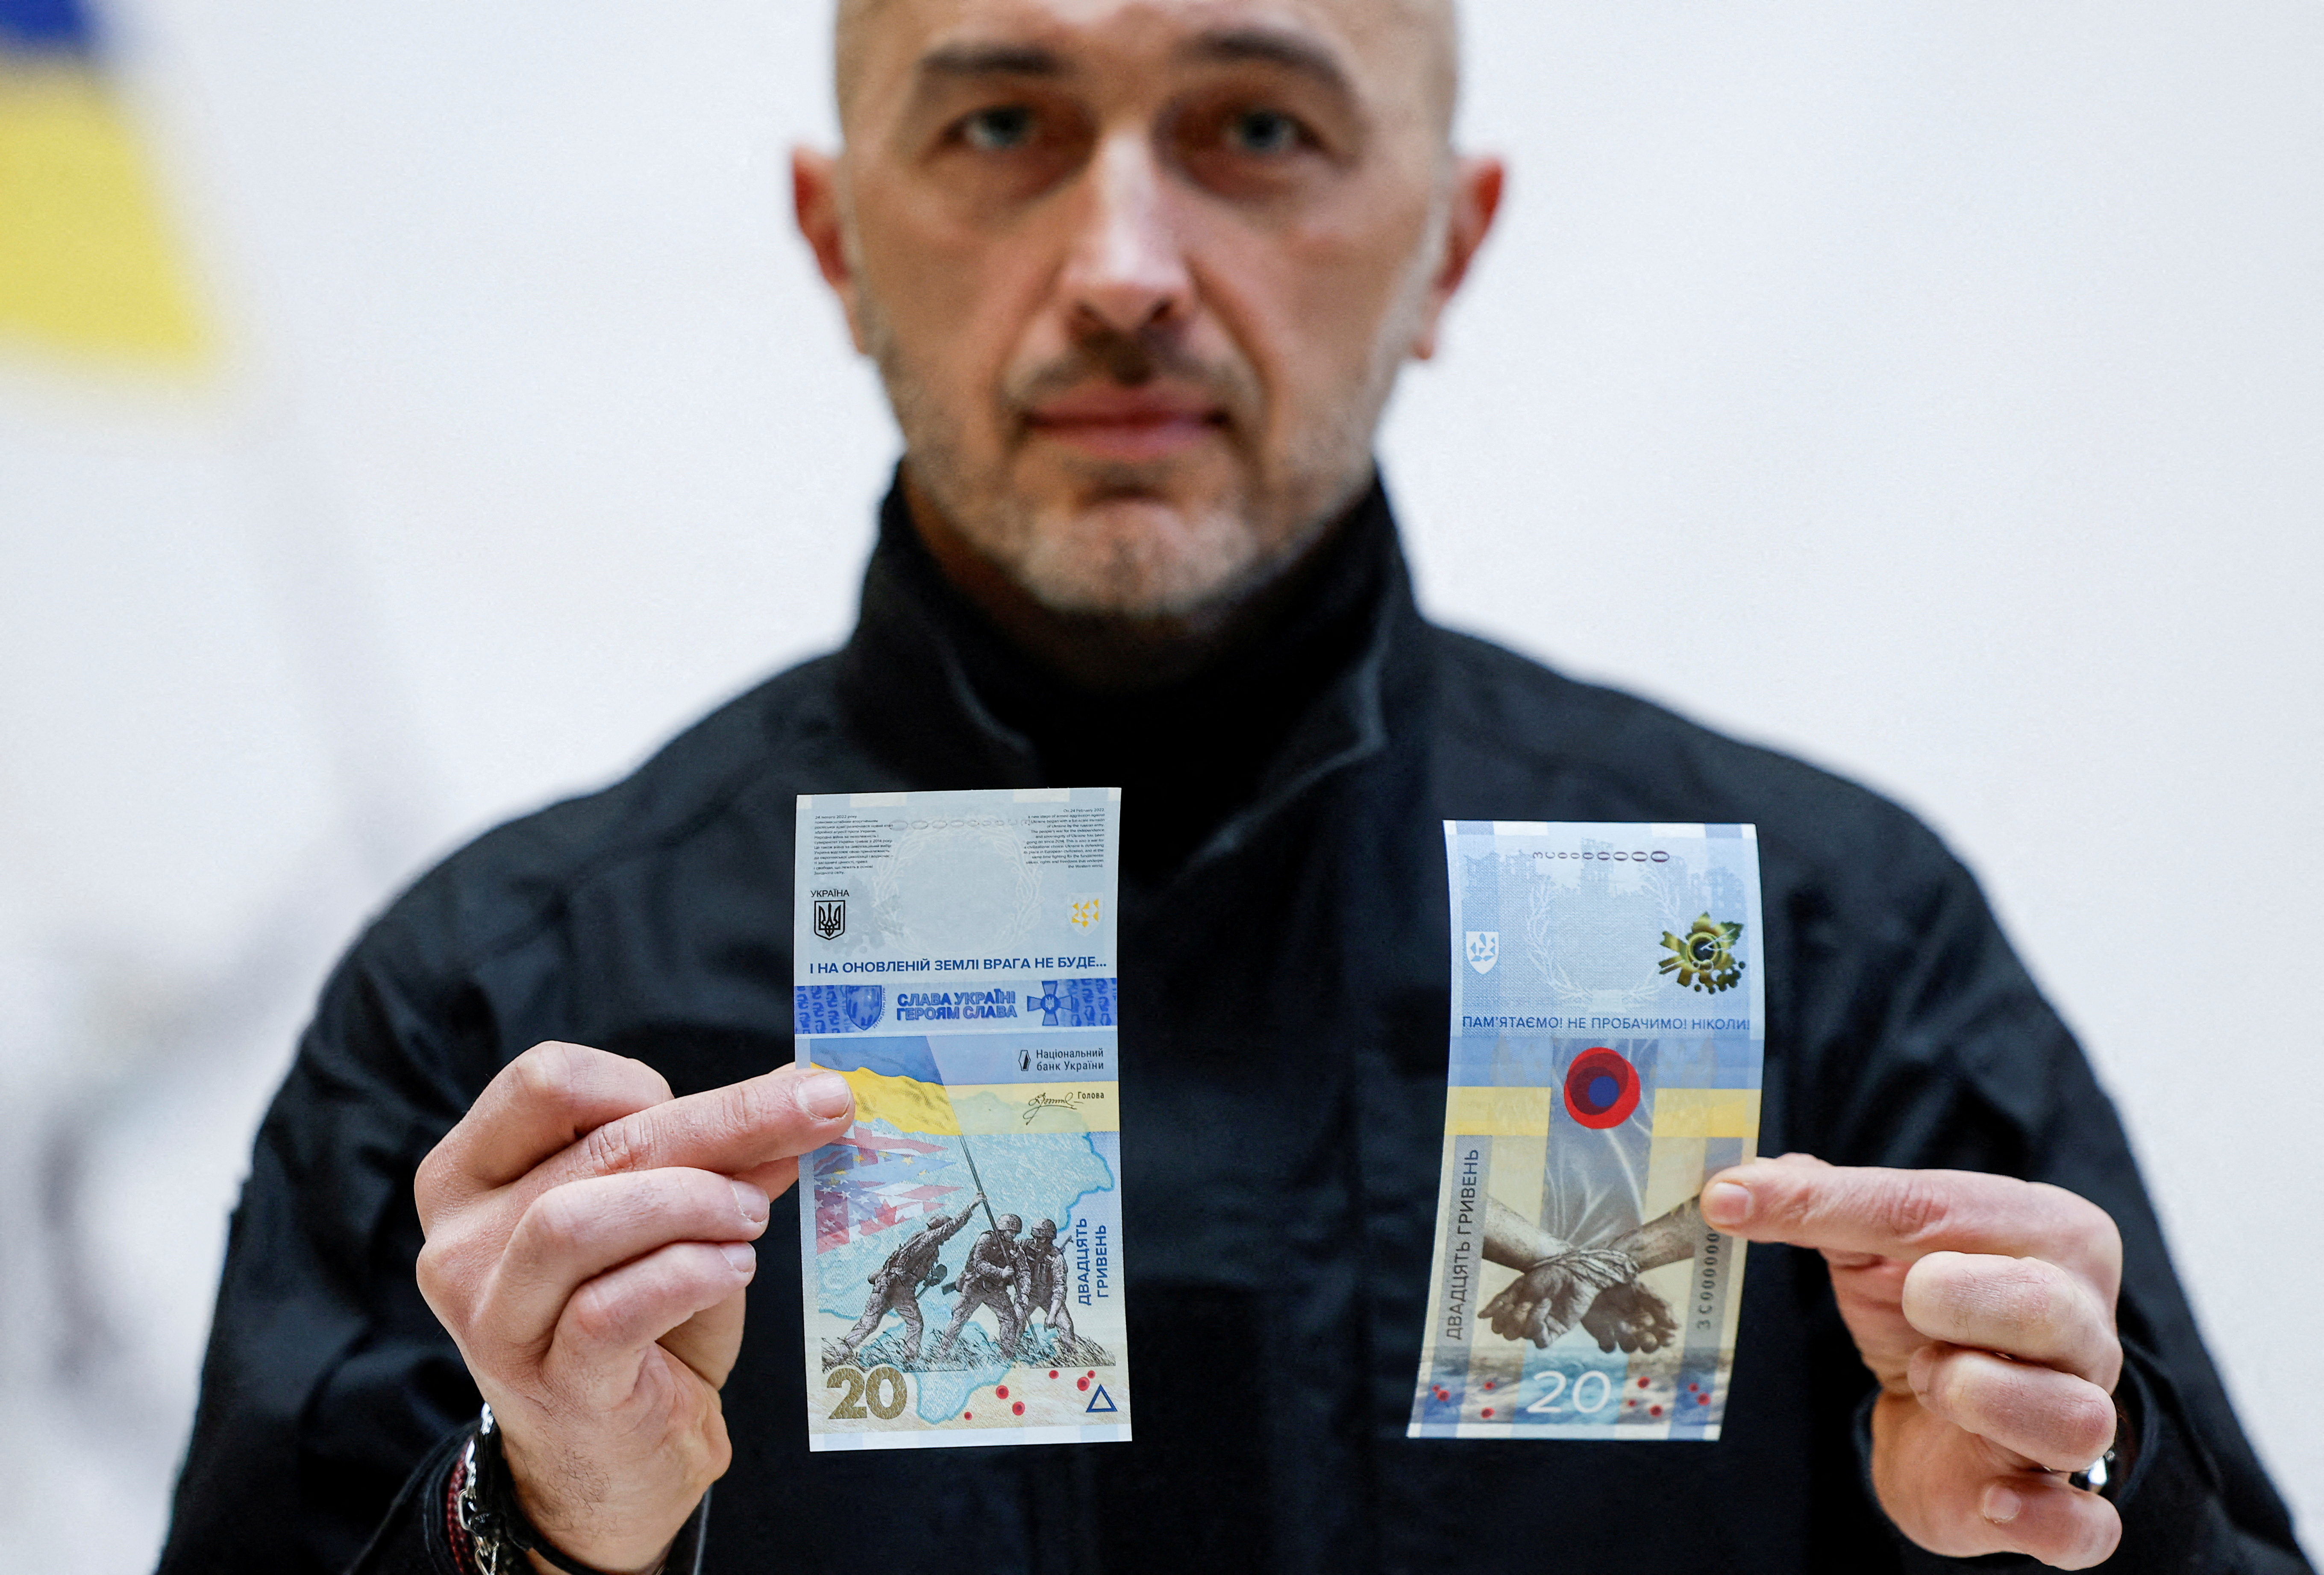 Banknotes dedicated the to first anniversary of Russia's invasion on Ukraine are presented in Kyiv